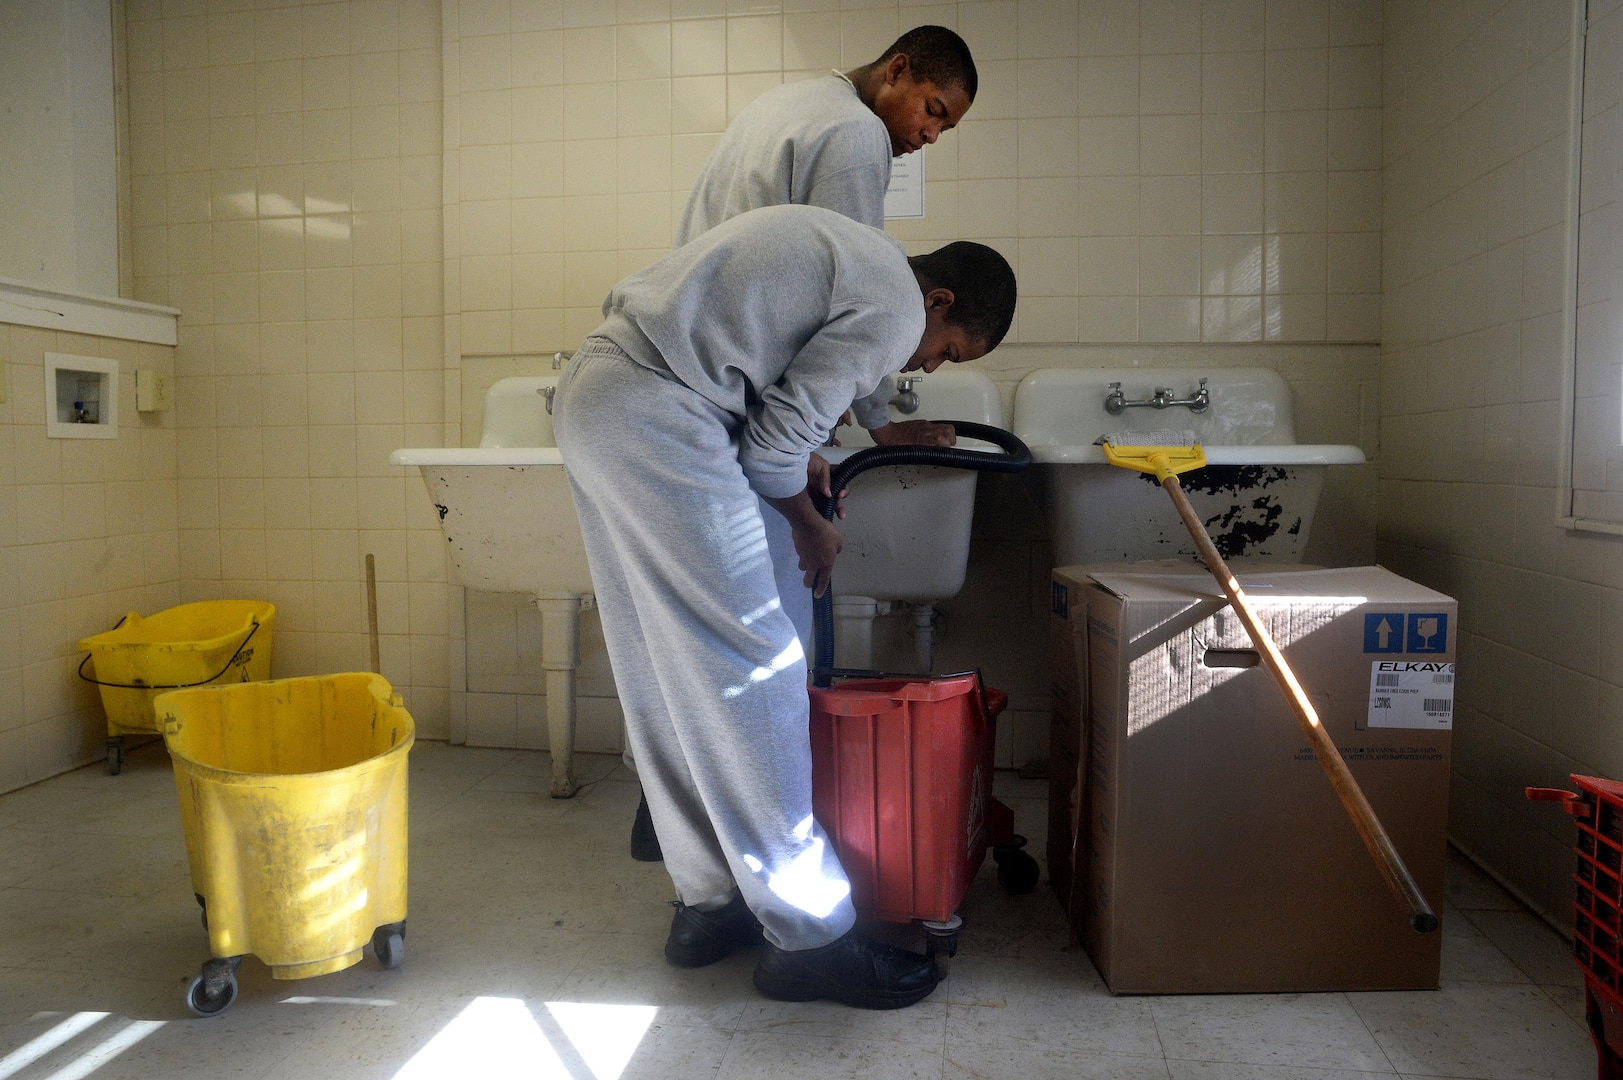 Malachi Ervin, foreground, and Tarvaress Williams, both cadets at the Maryland National Guard’s Freestate ChalleNGe Academy, fill a bucket with hot water while stripping and waxing the floors in the academy’s barracks building, Nov. 17, 2015. Those at the academy learn not only academic skills in preparation for earning either their GED certificate or high school diploma, but also life skills as well. Rather than simply assigning housekeeping duties to cadets, at the Freestate Academy cadets must formally apply and interview with academy staff as a way to prepare them for job interviews. 